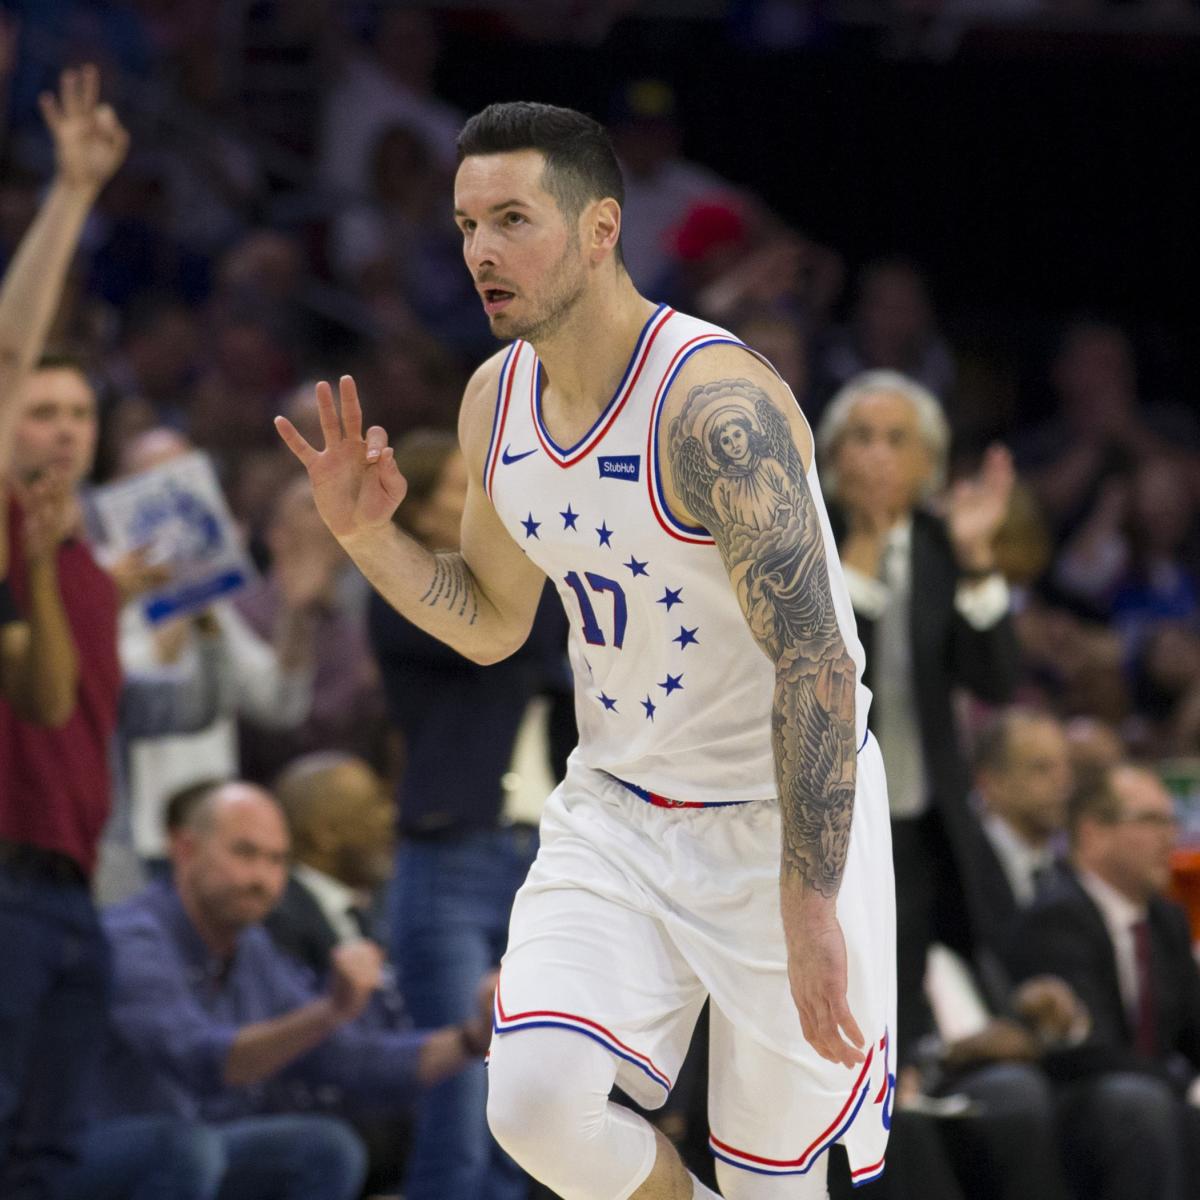 What is JJ Redick's net worth?